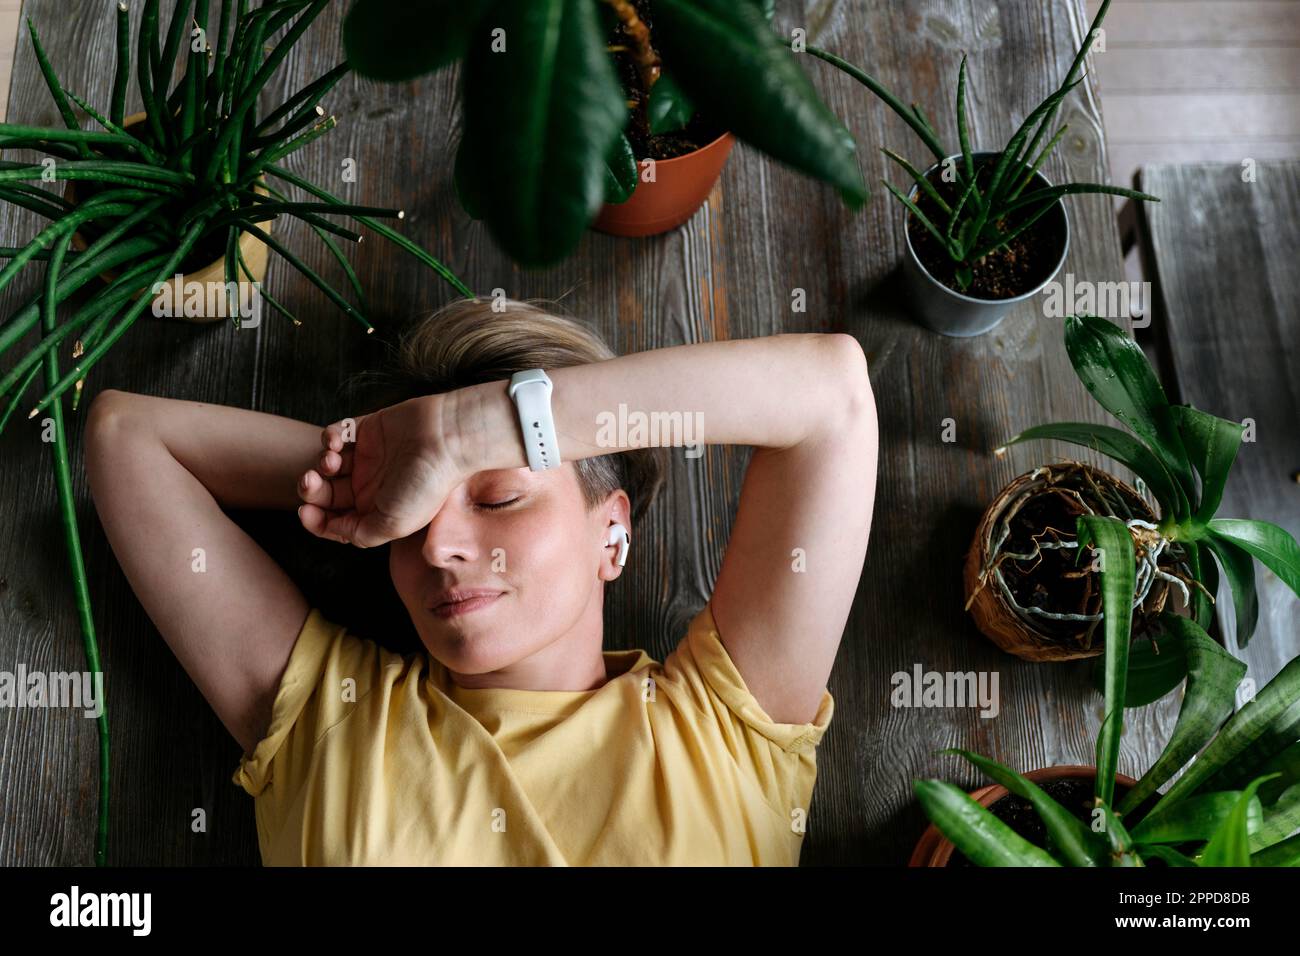 Mature woman sleeping amidst plants at home Stock Photo